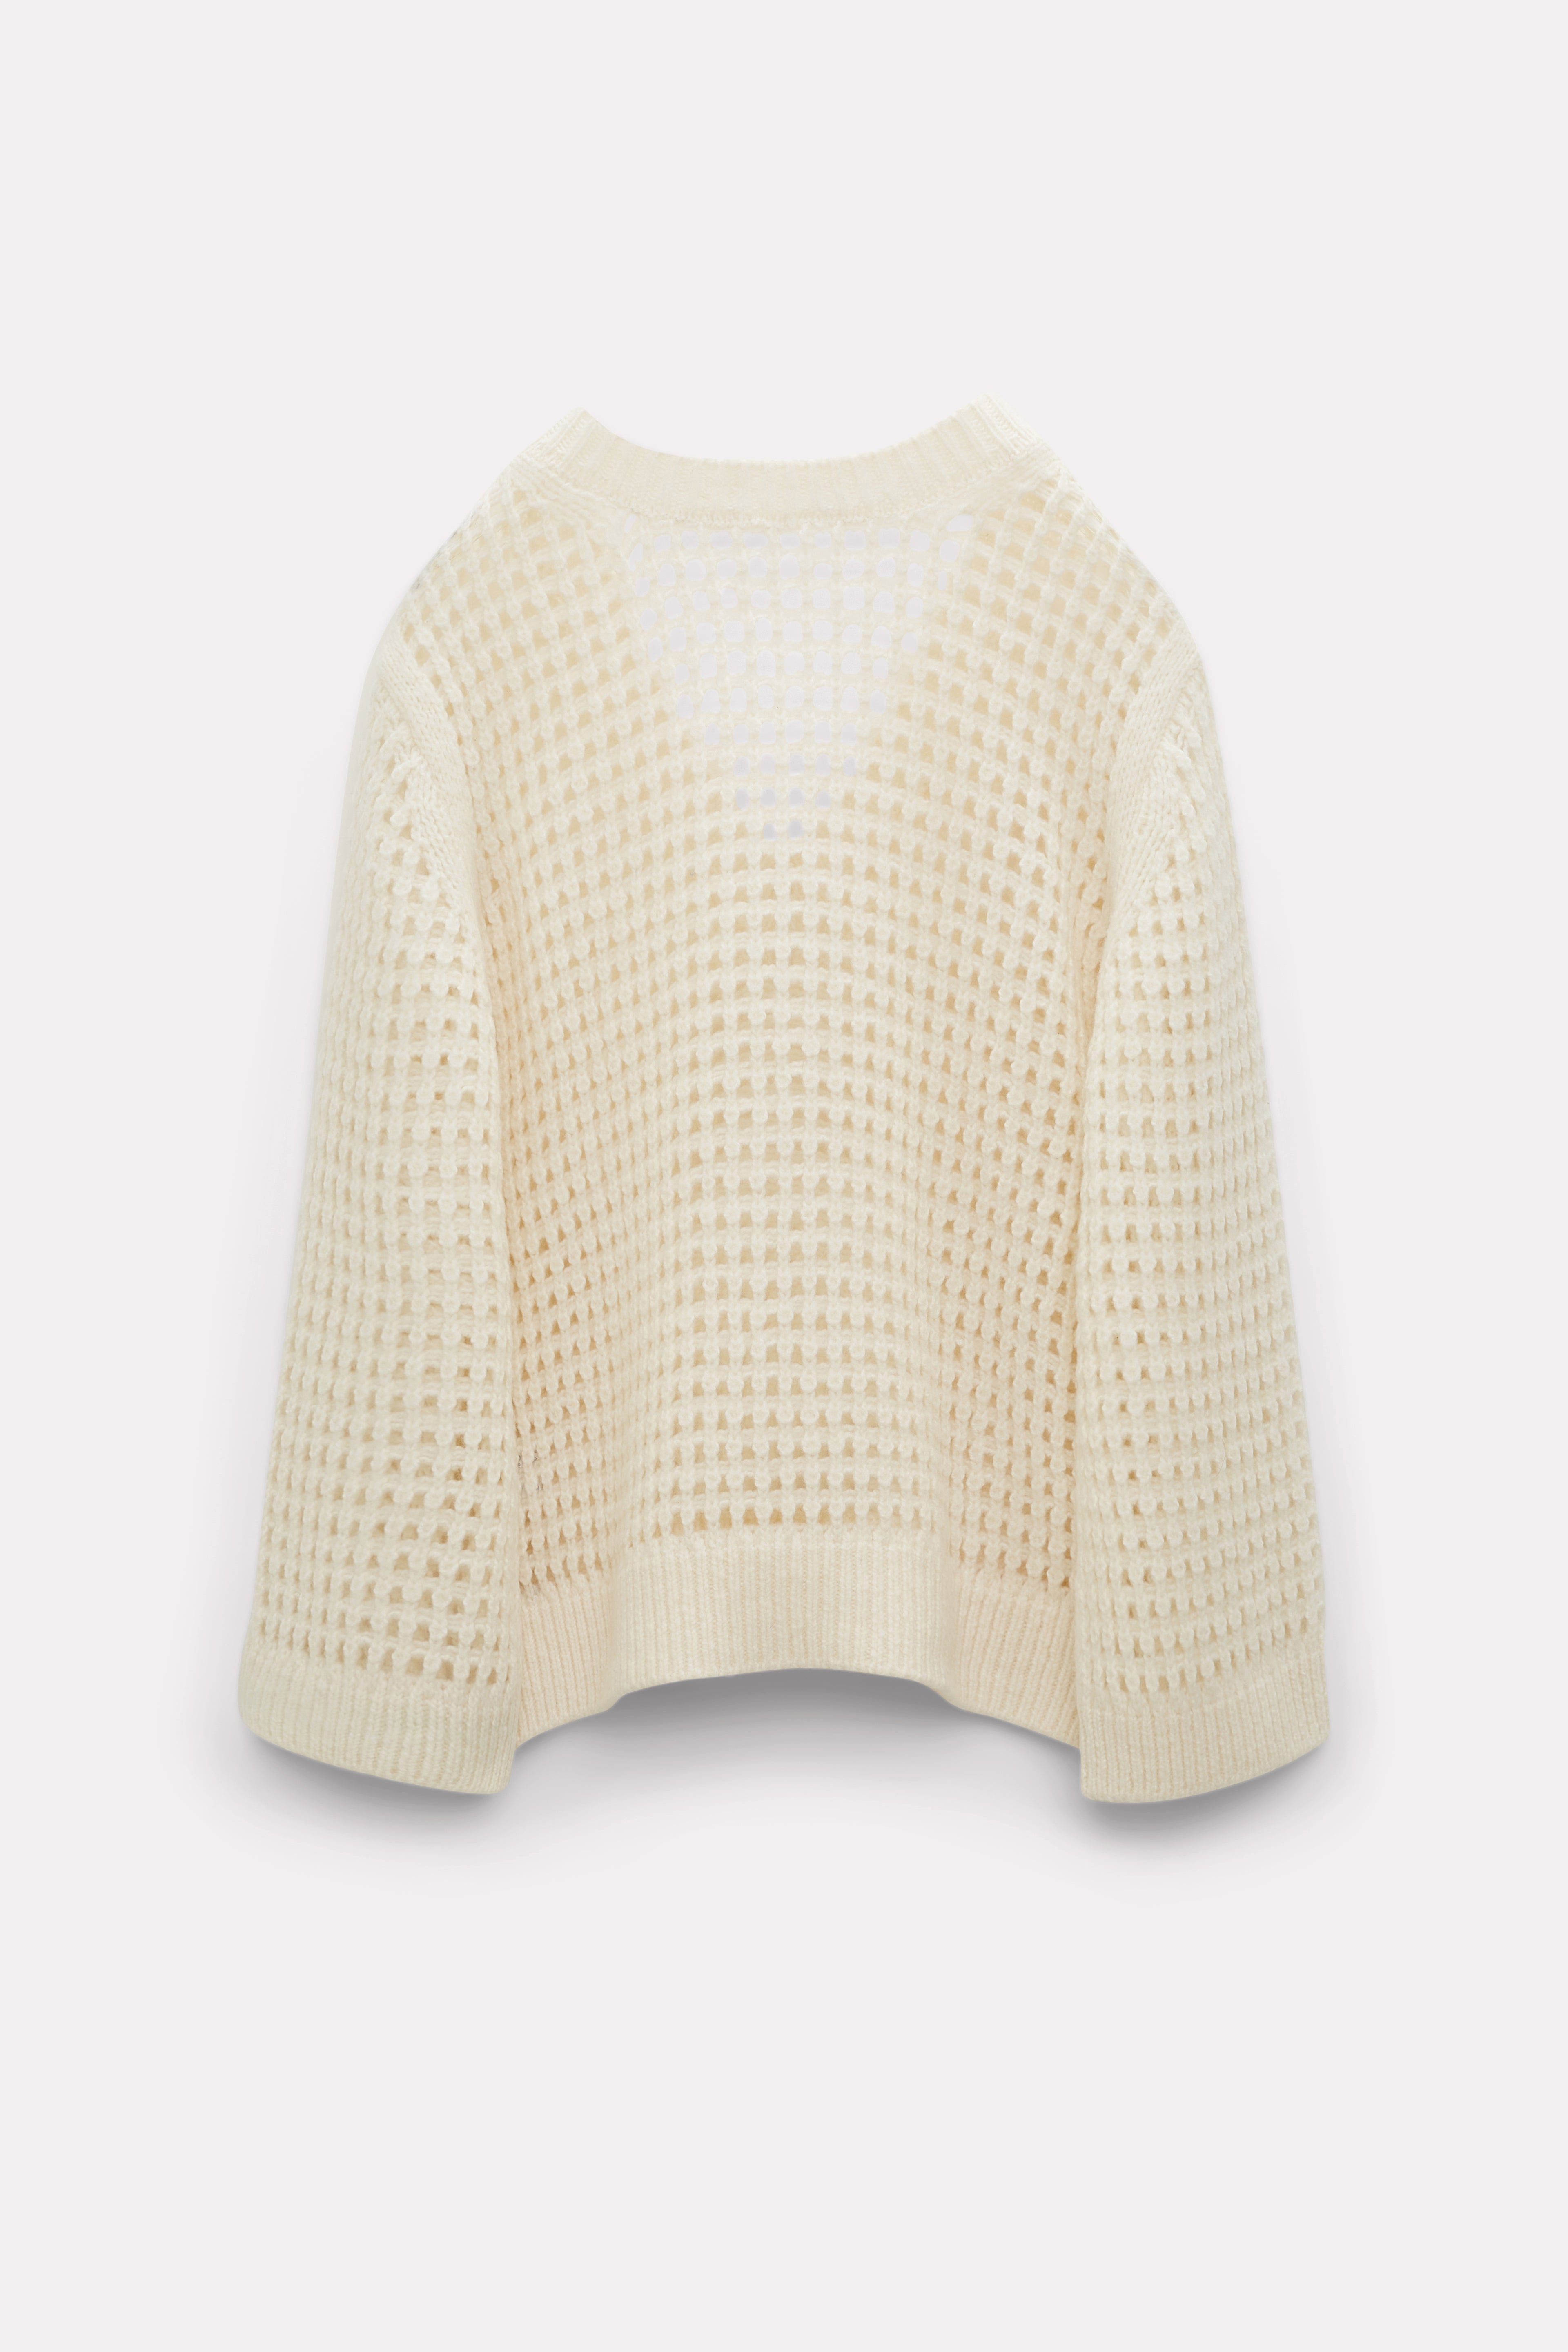 Dorothee-Schumacher-OUTLET-SALE-LUXURY-AIRINESS-pullover-Strick-ARCHIVE-COLLECTION-2.jpg